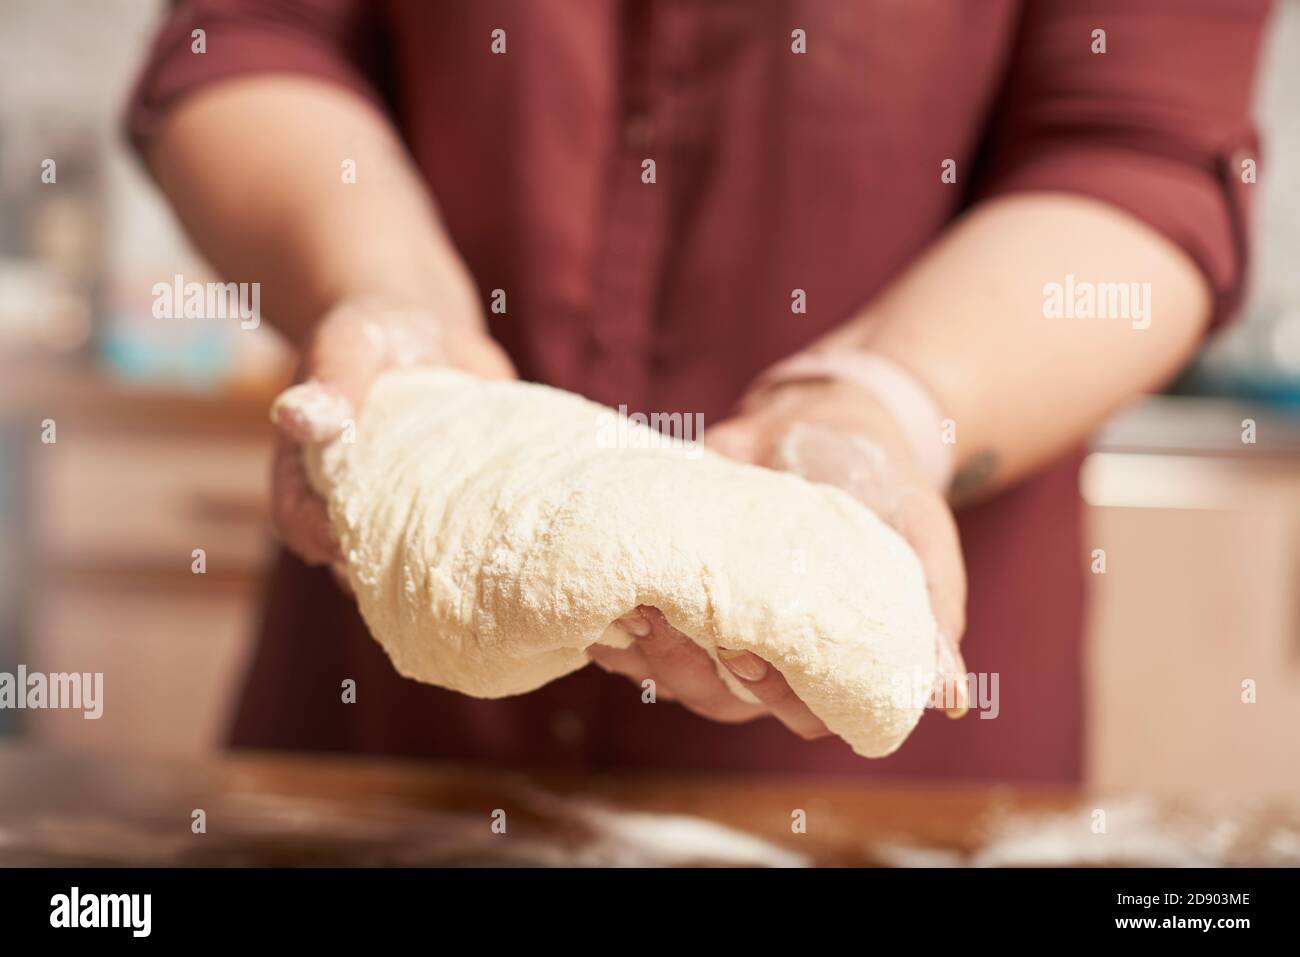 Female hands holding the finished raw dough close up Stock Photo